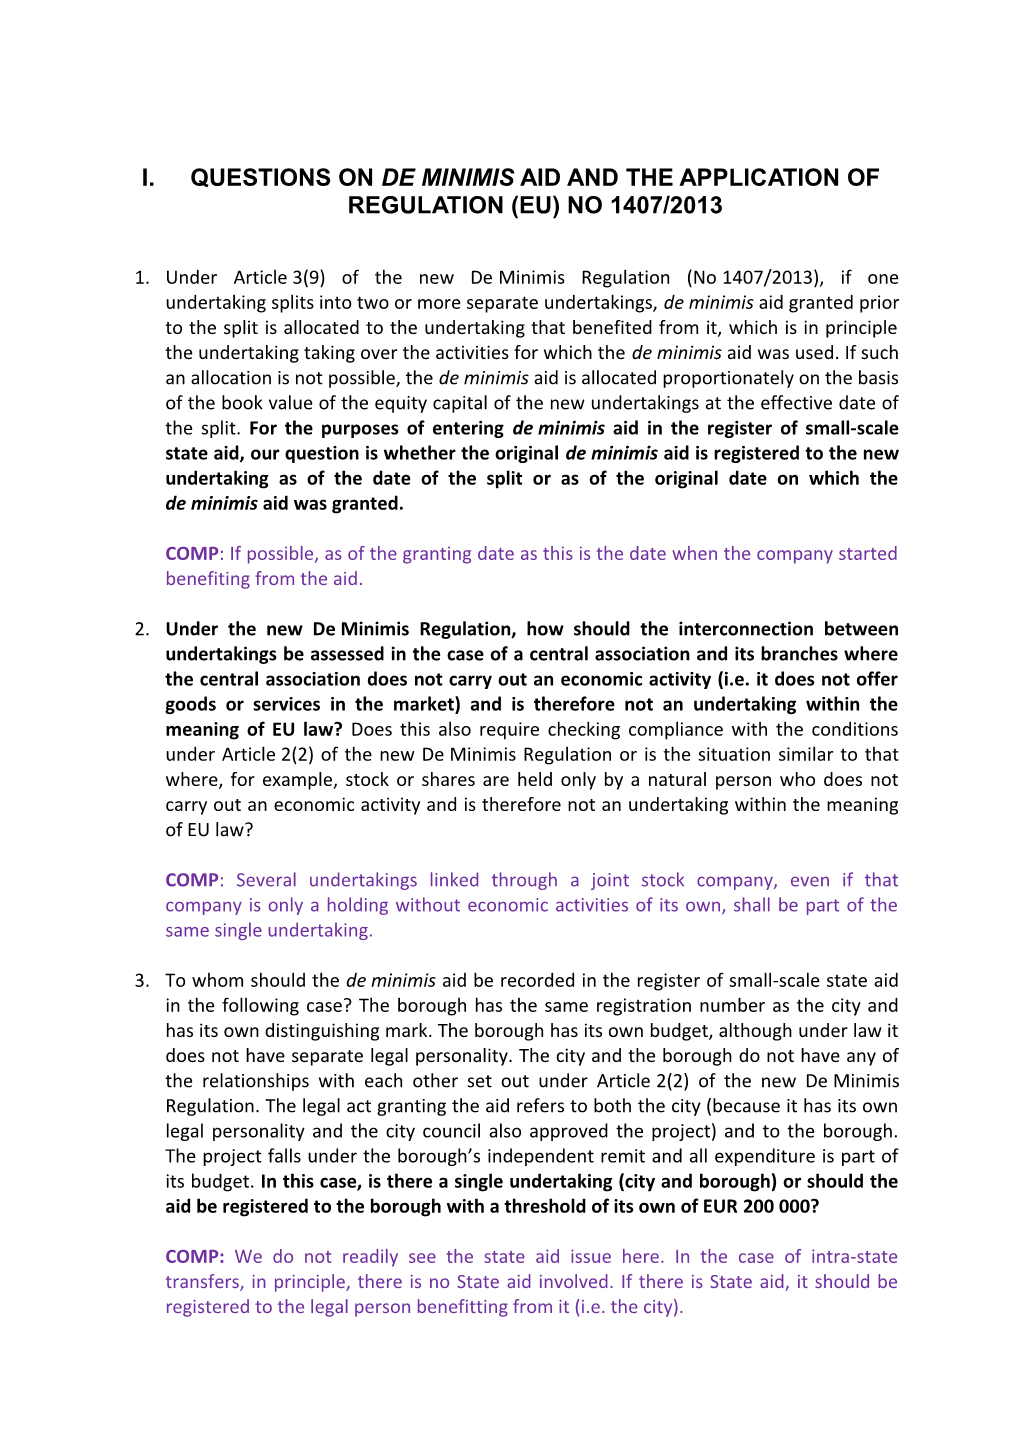 Questions on Deminimis Aid and the Application of Regulation (EU) No1407/2013